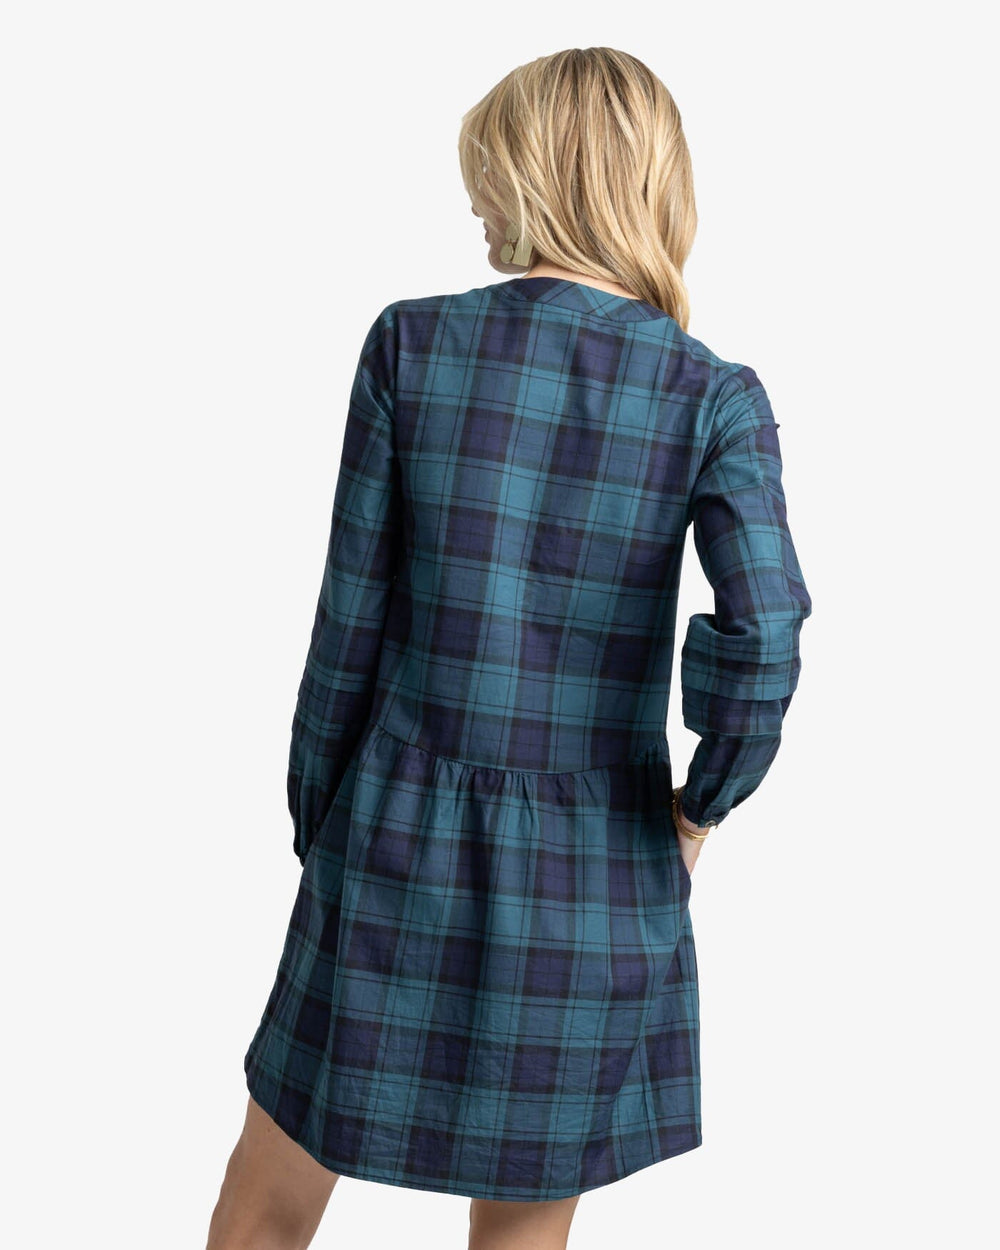 The back view of the Southern Tide Lendy Plaid Dress by Southern Tide - Georgian Bay Green